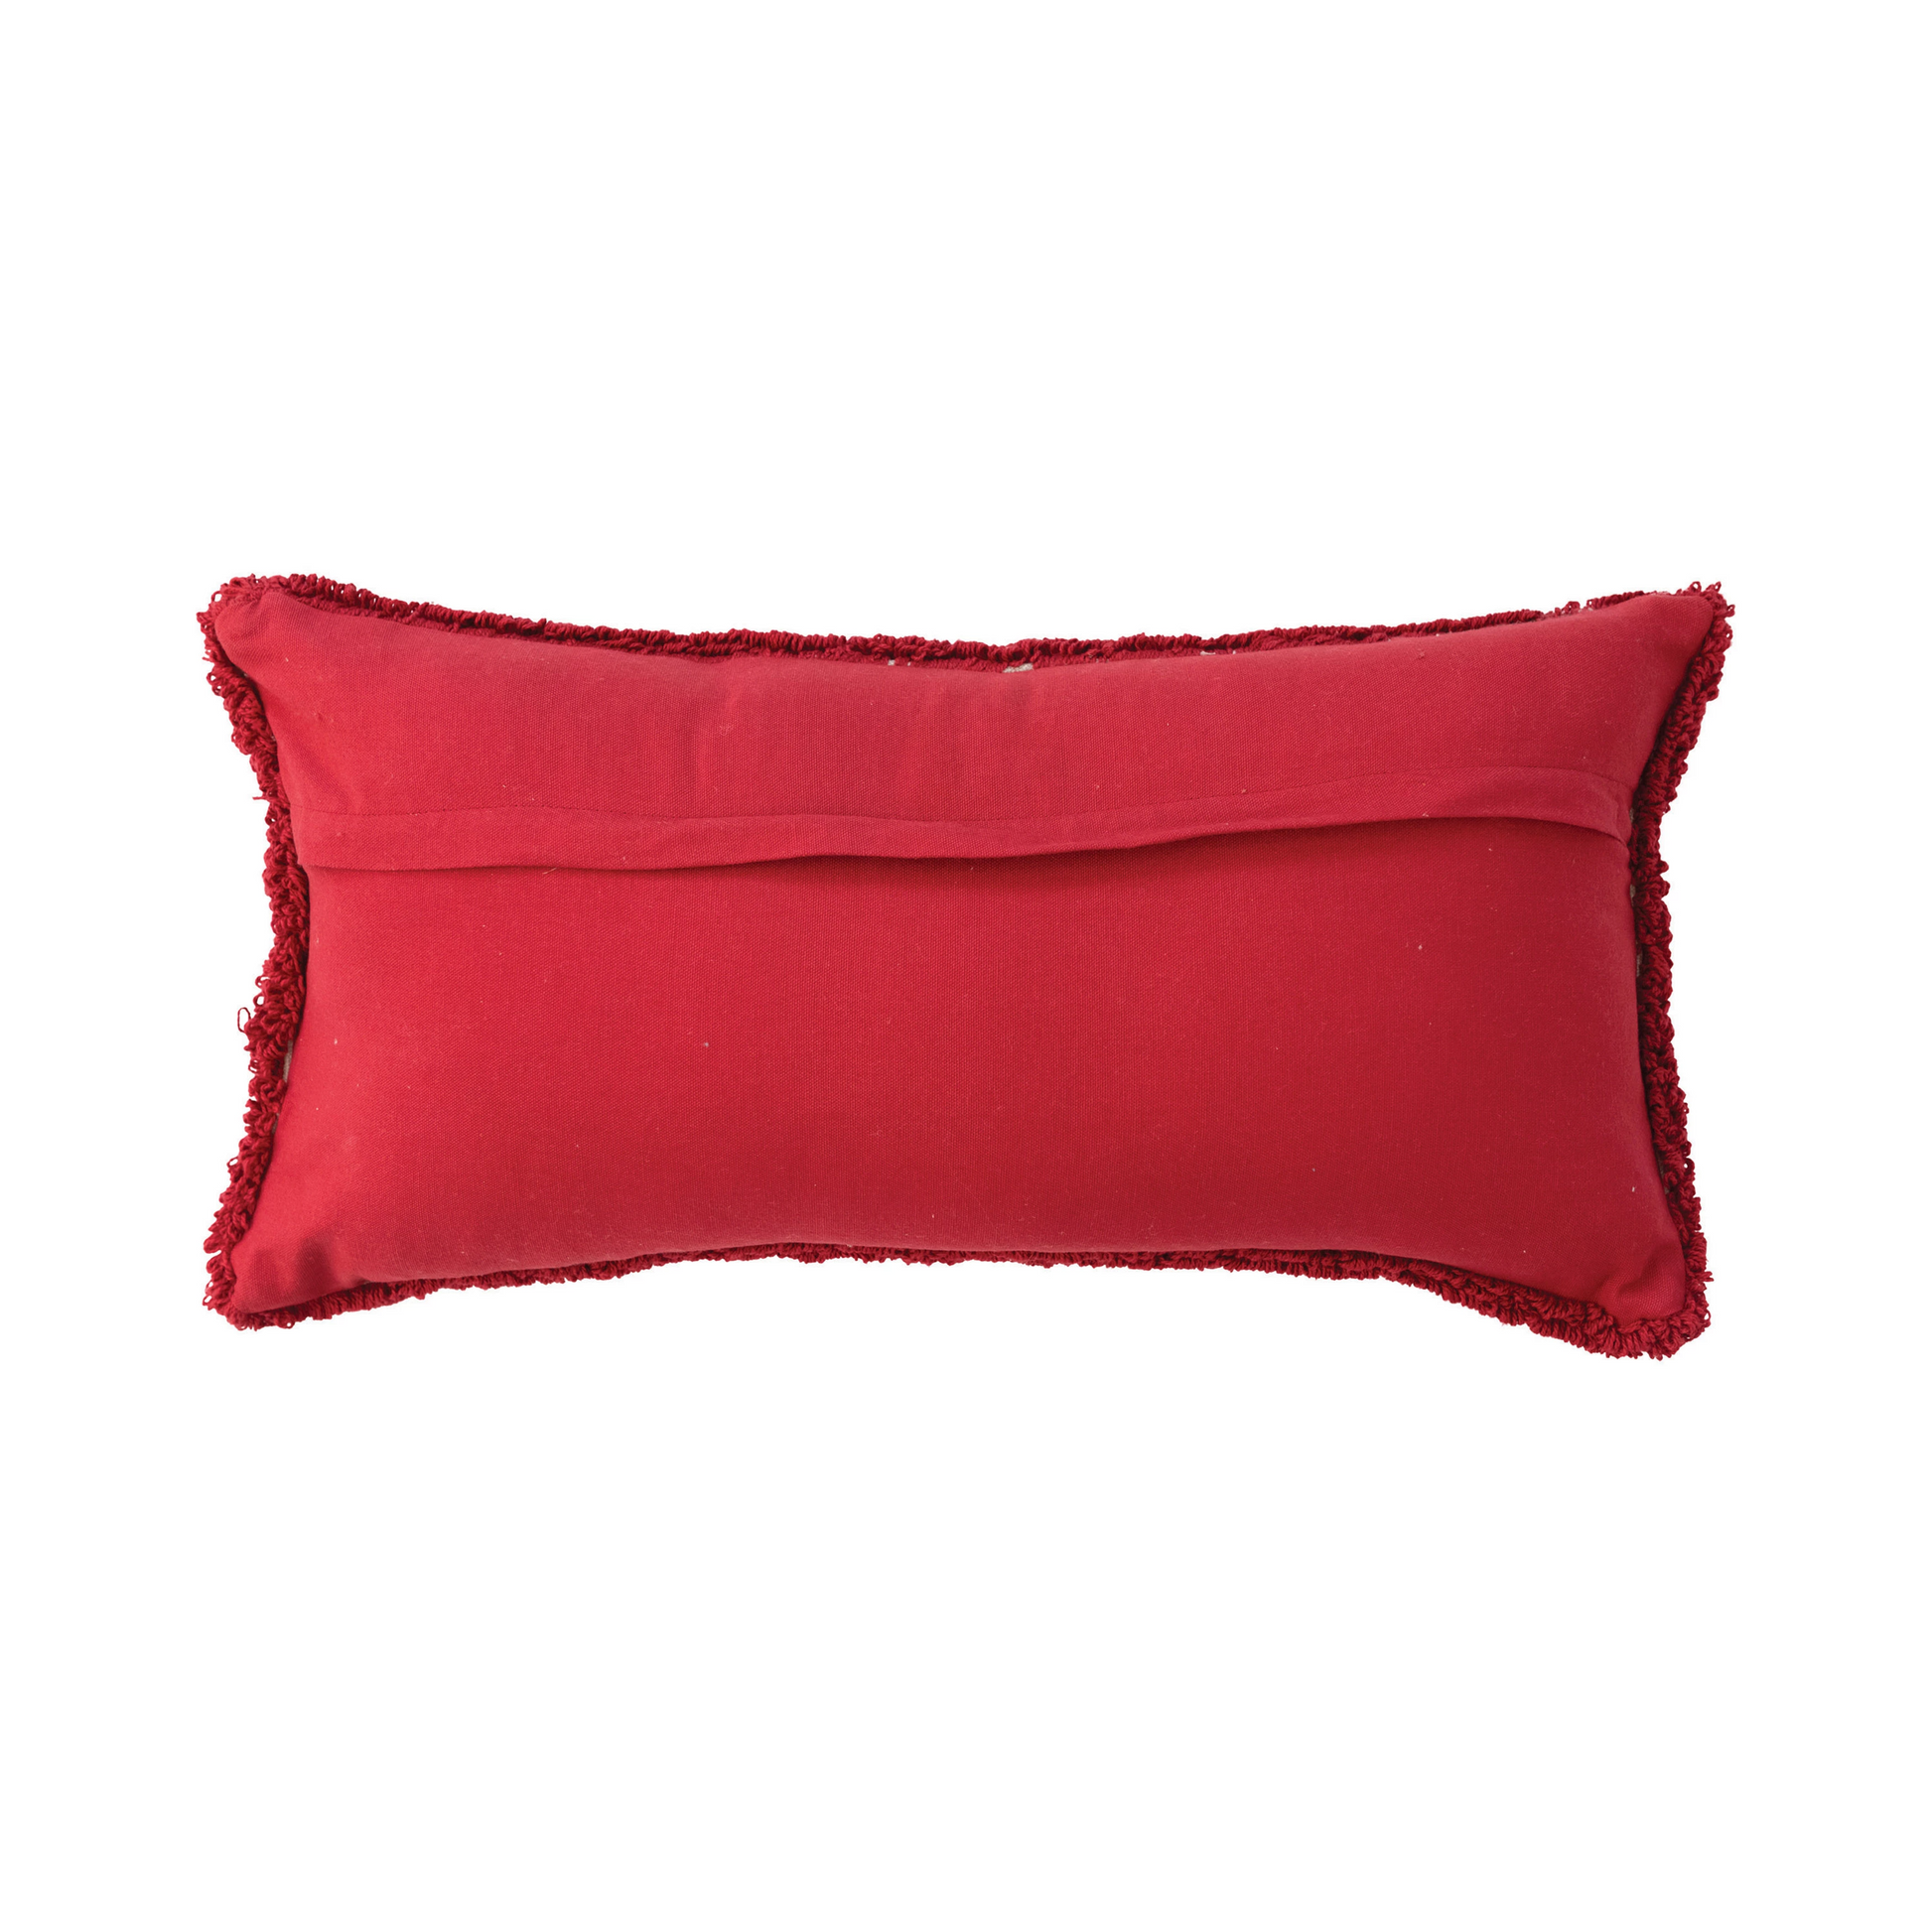 Homey Cozy Merry Christmas Holiday Oversized Fabric Pillow with Insert in  Red